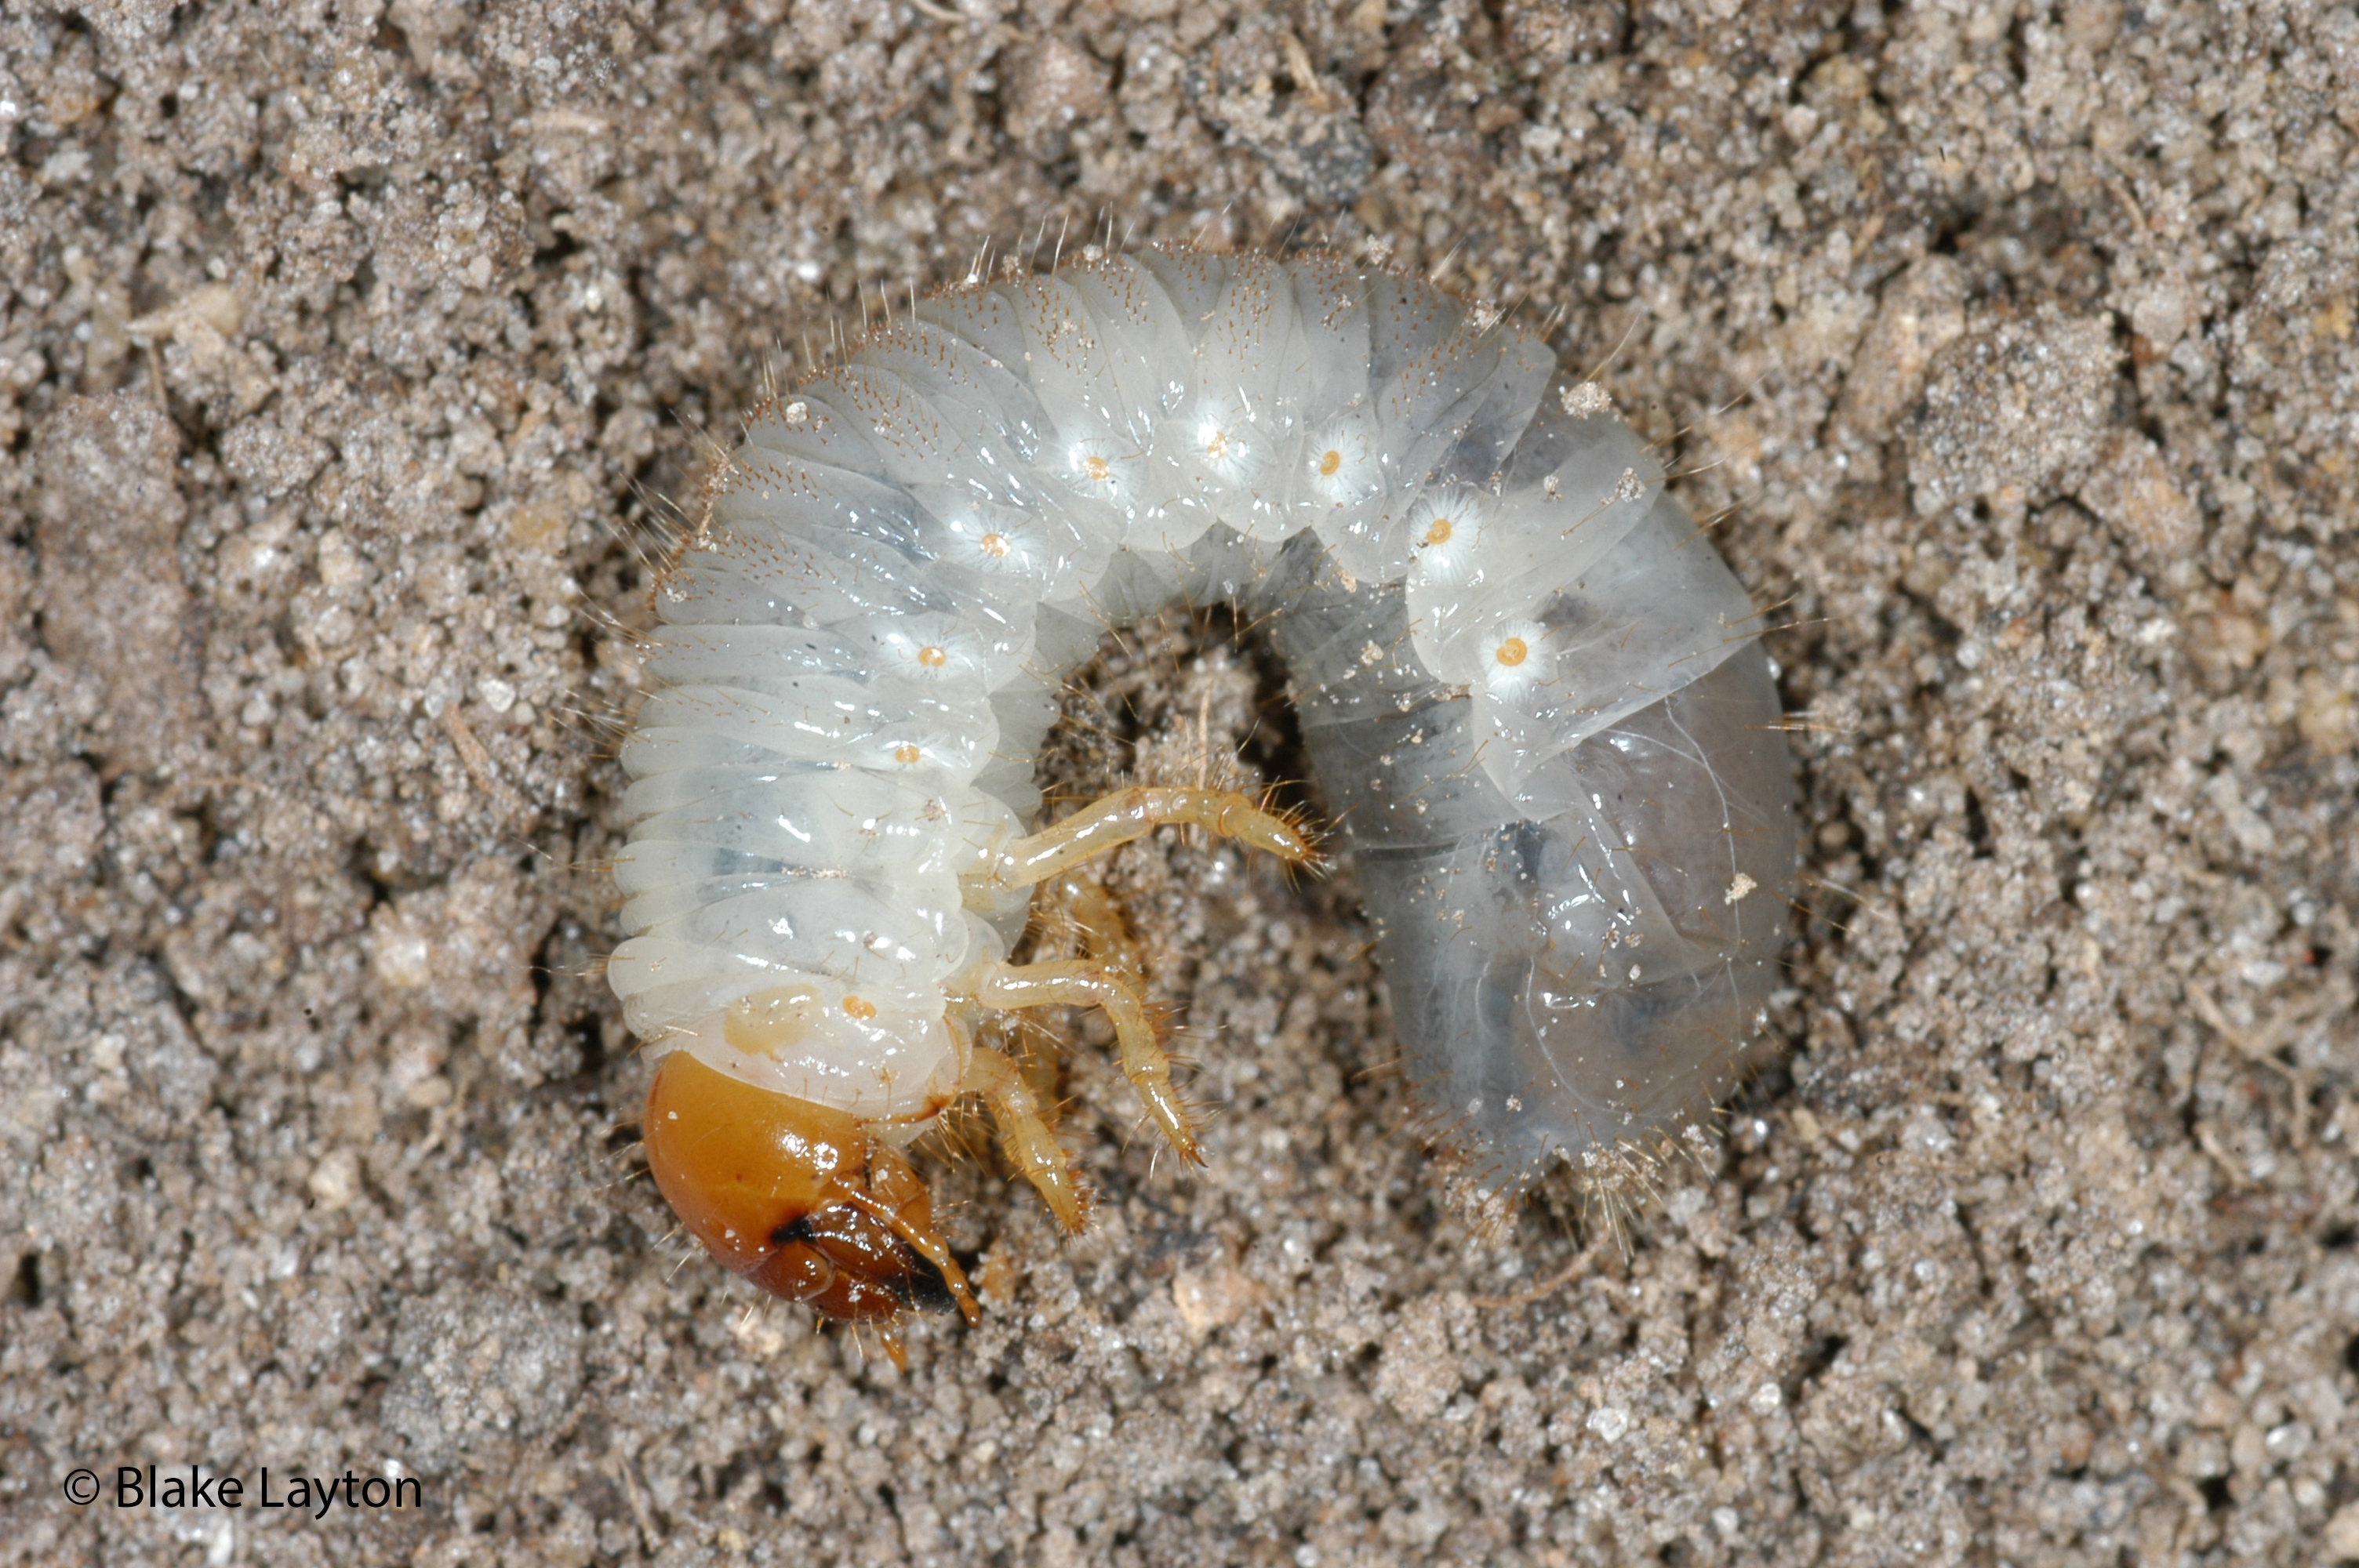 A white-tinted translucent bug with an orange head is curled into the shape of the letter "C" on brown dirt.